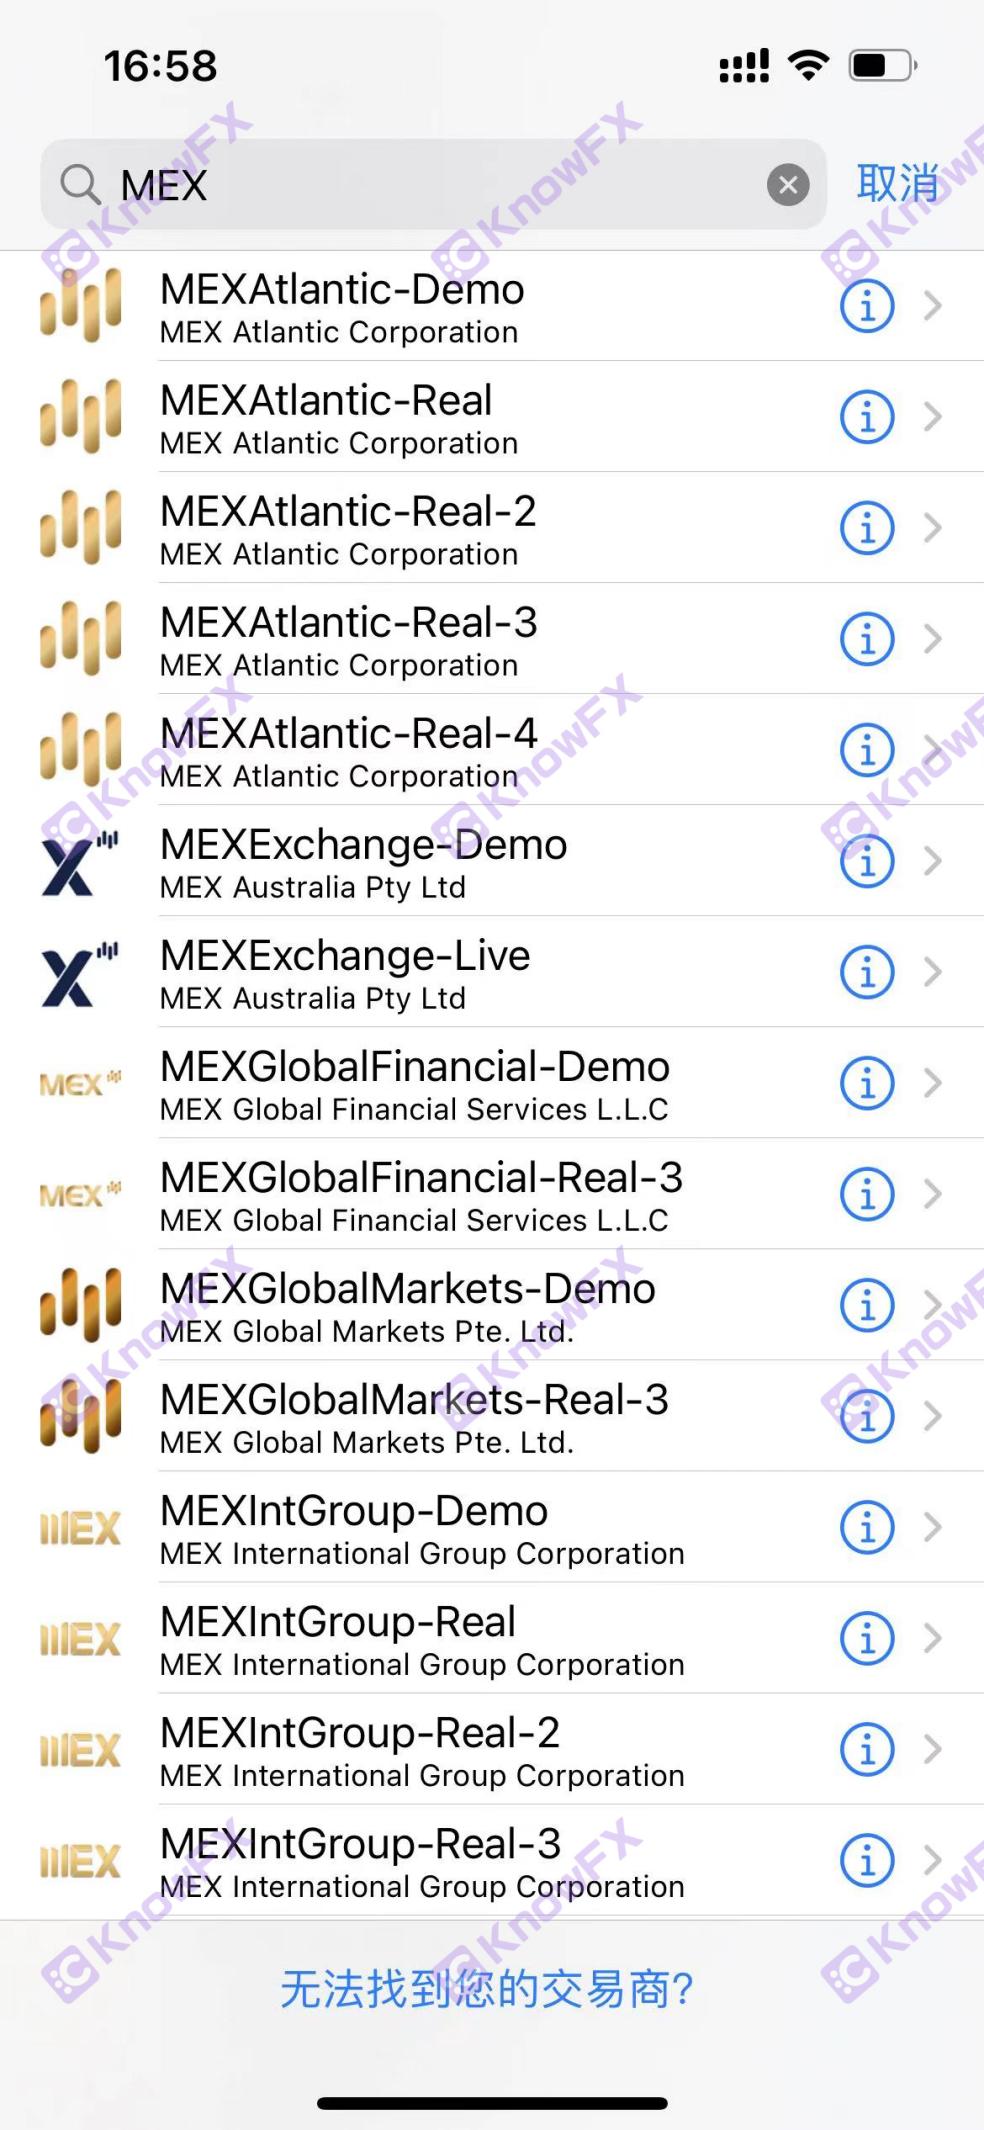 Forex securities firms Multibank Group Datong Financial Group uses a registered company to pretend to be a foreign exchange transaction!Self -developed app dipped in MT4, 5-第10张图片-要懂汇圈网